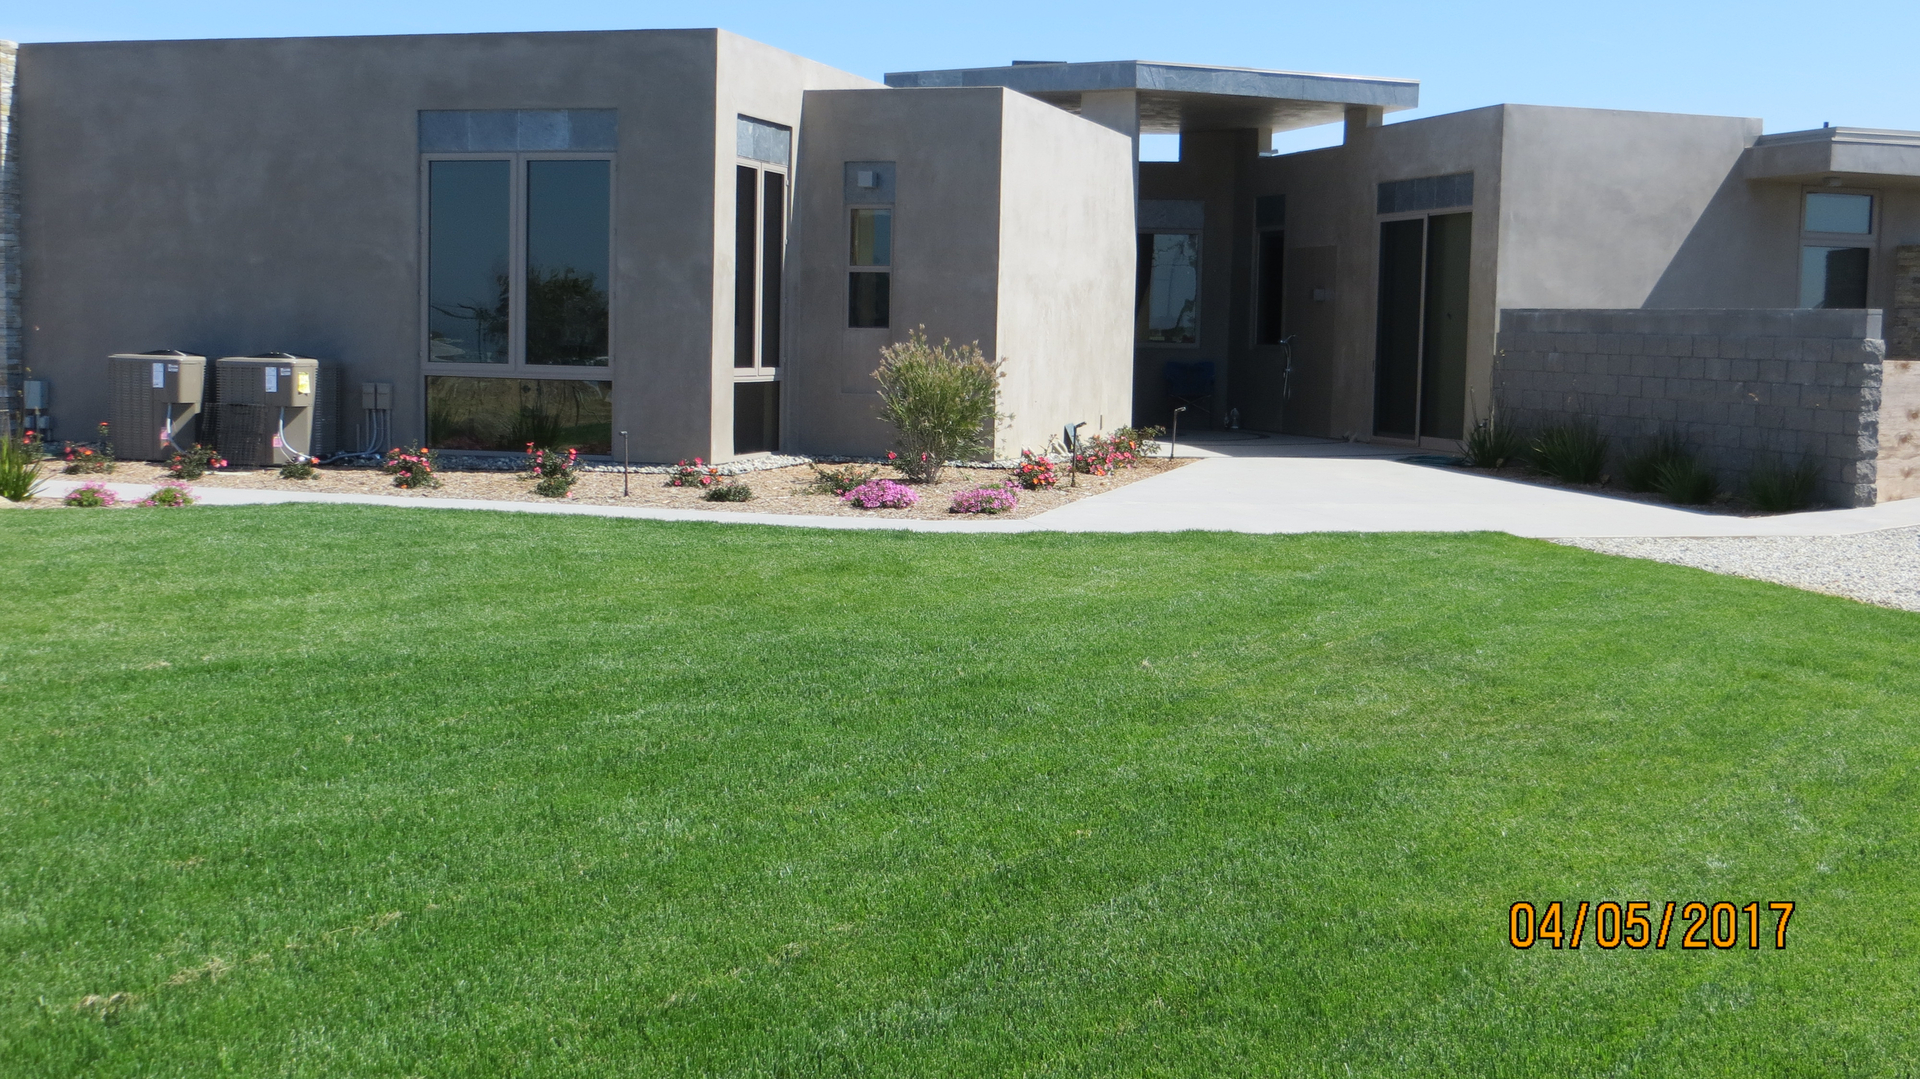 A Grey Color Concrete Home With Grass Lawn